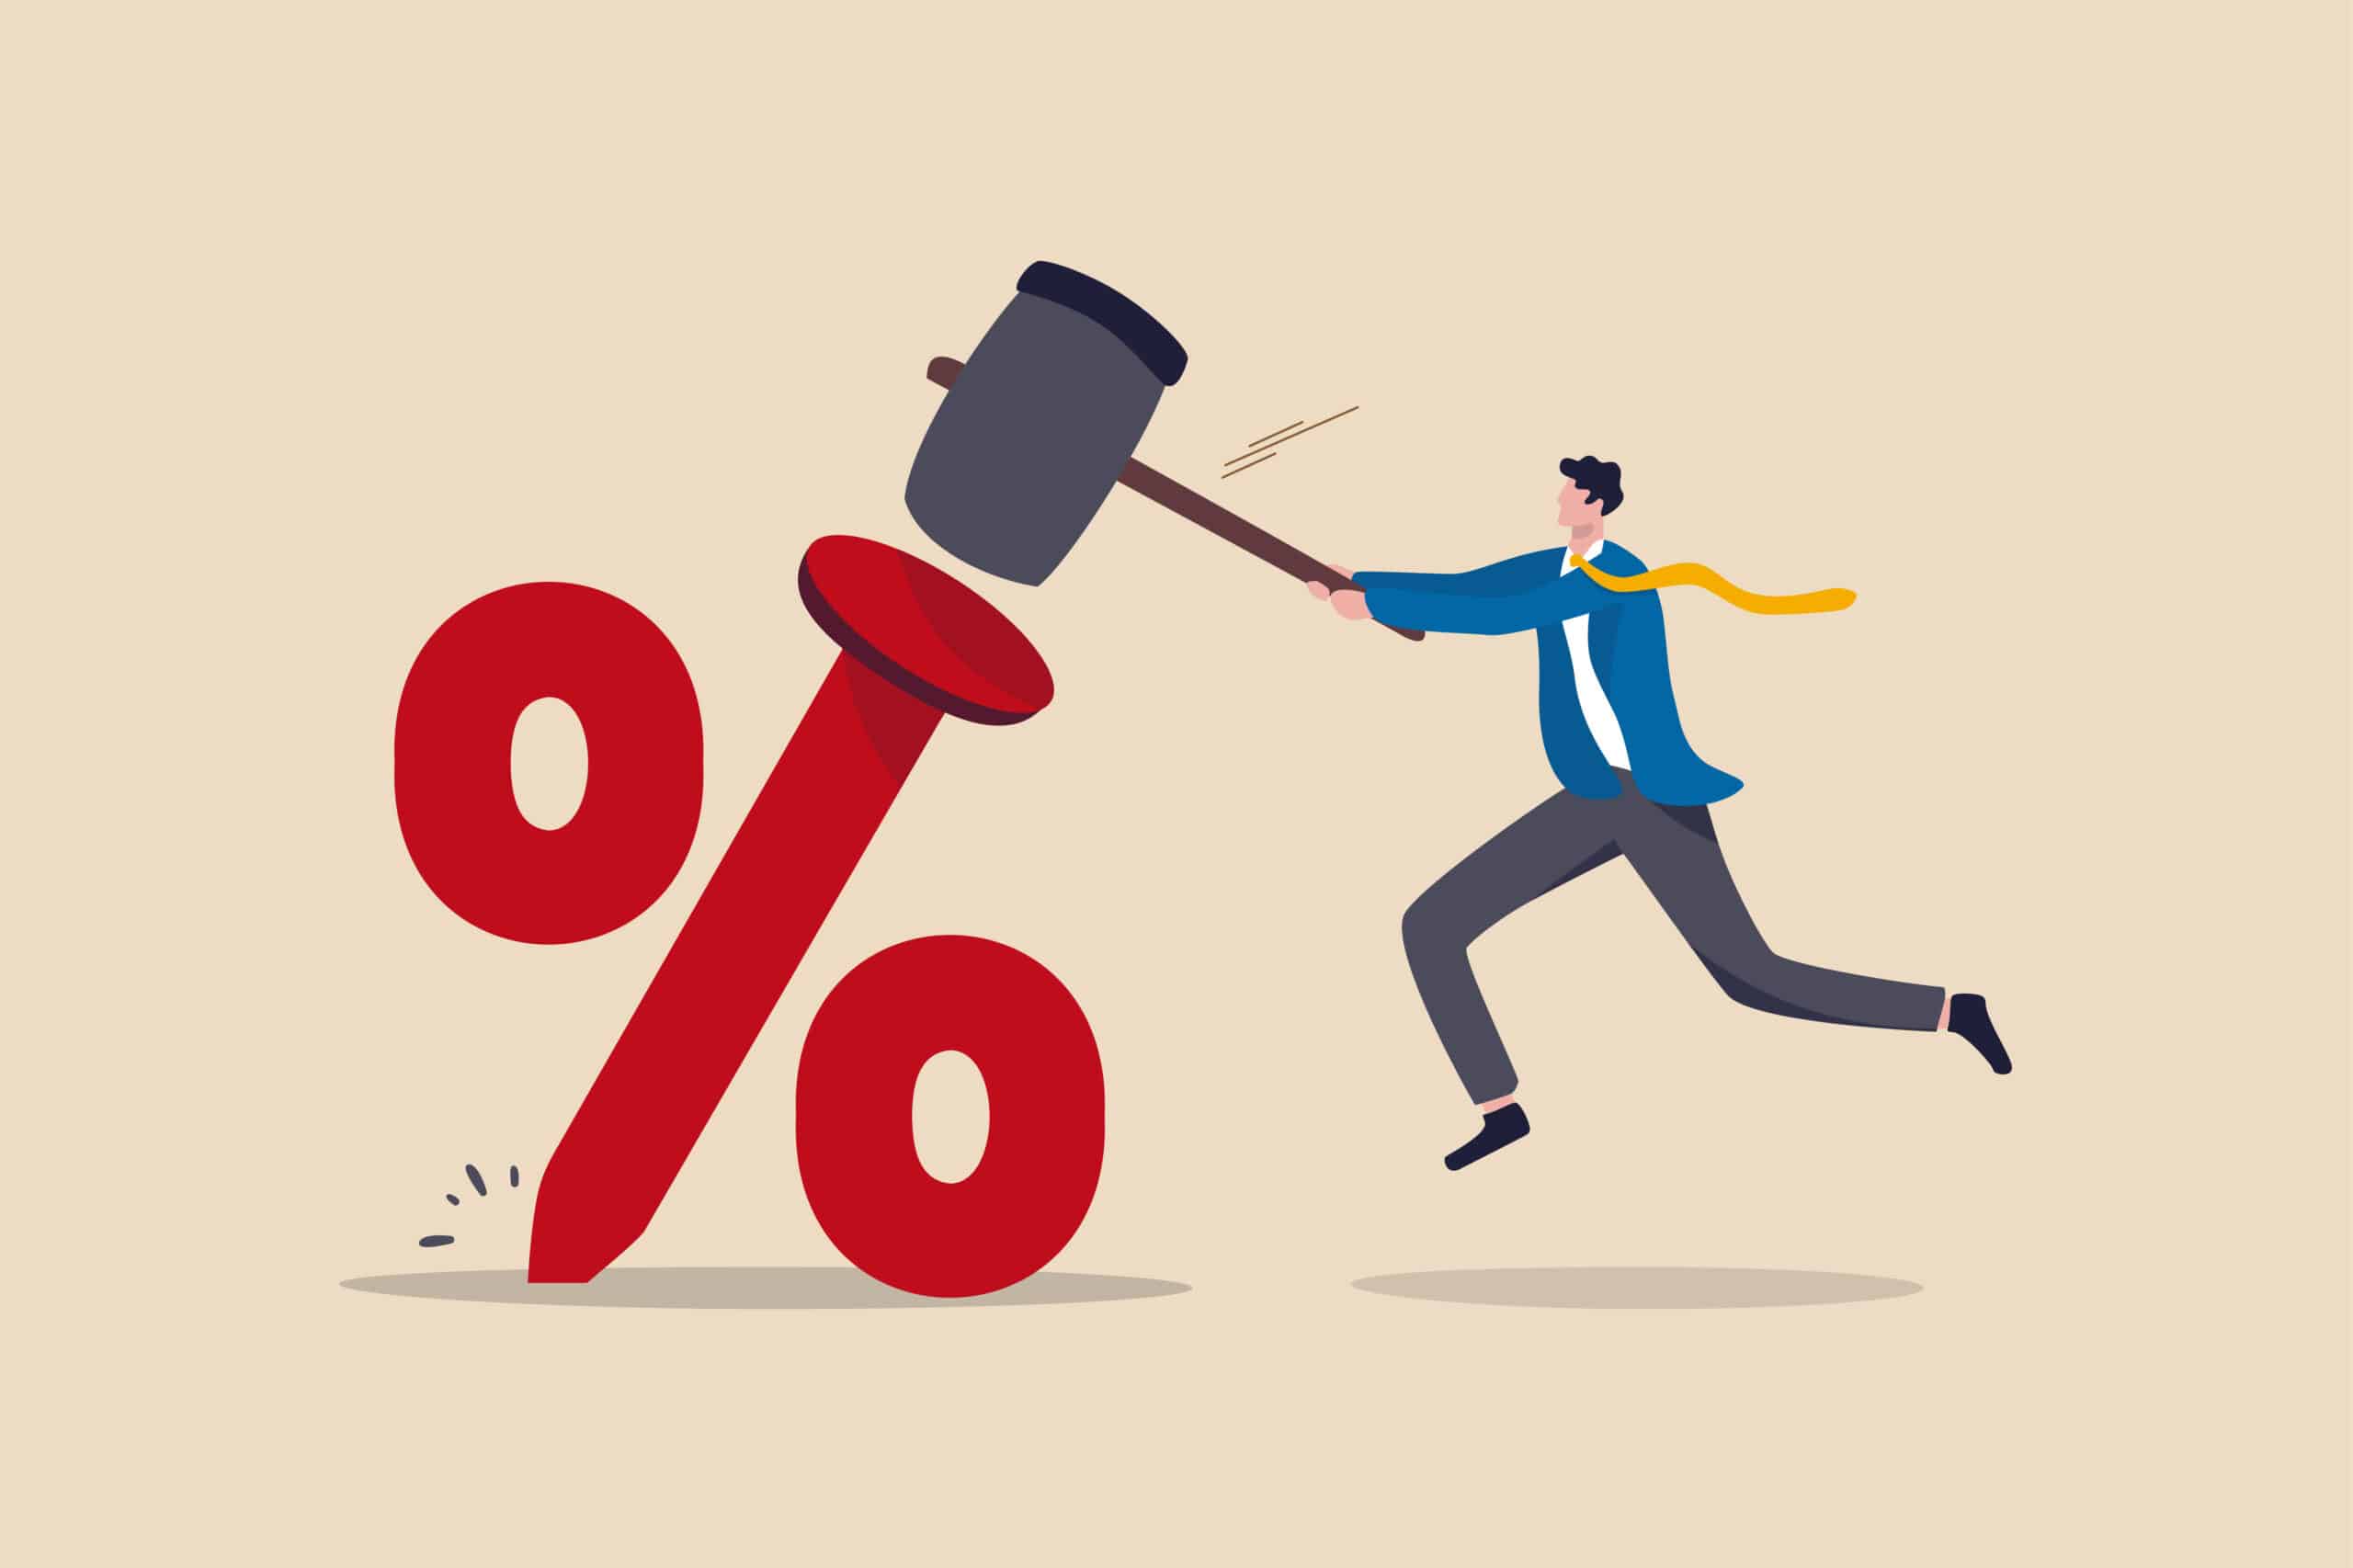 Man pushing hammer into red percentage sign - Lower Interest Rate